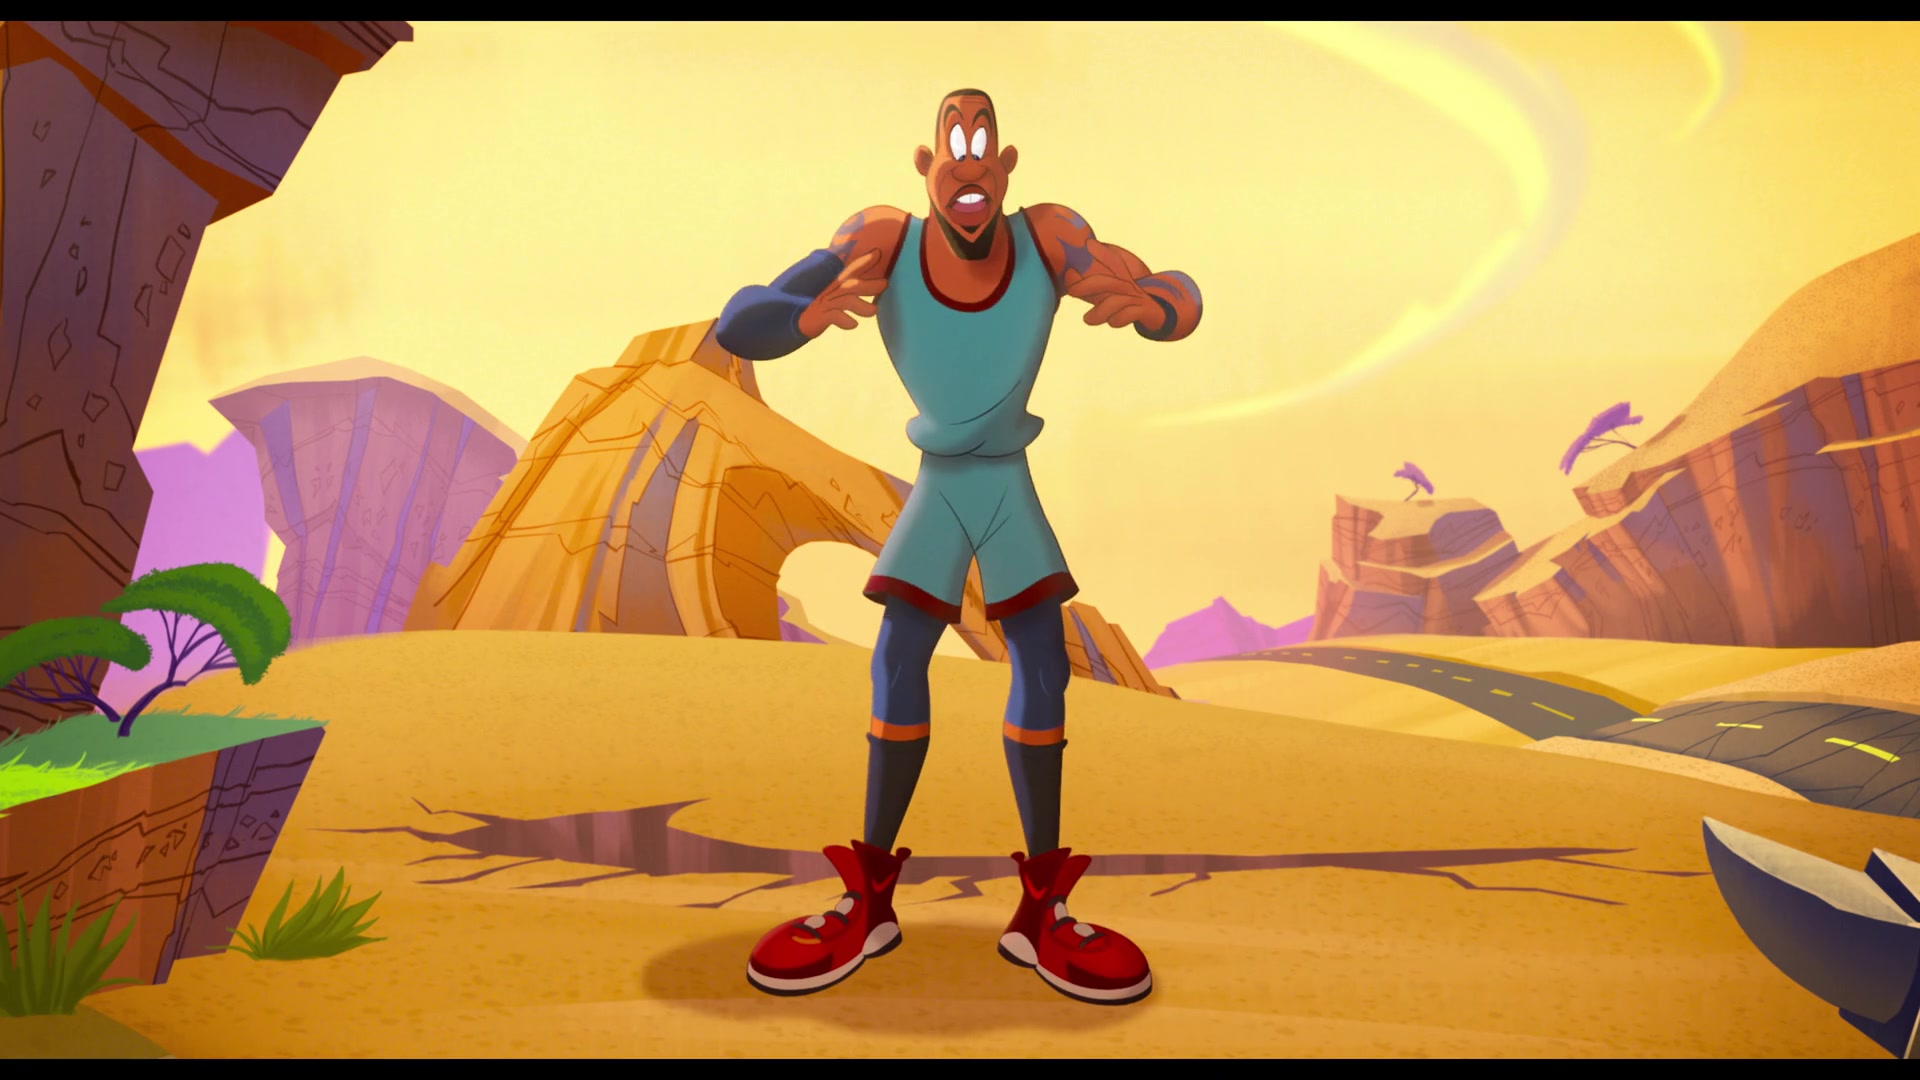 Space Jam: A New Legacy' Review: That's Not Quite All, Folks - The